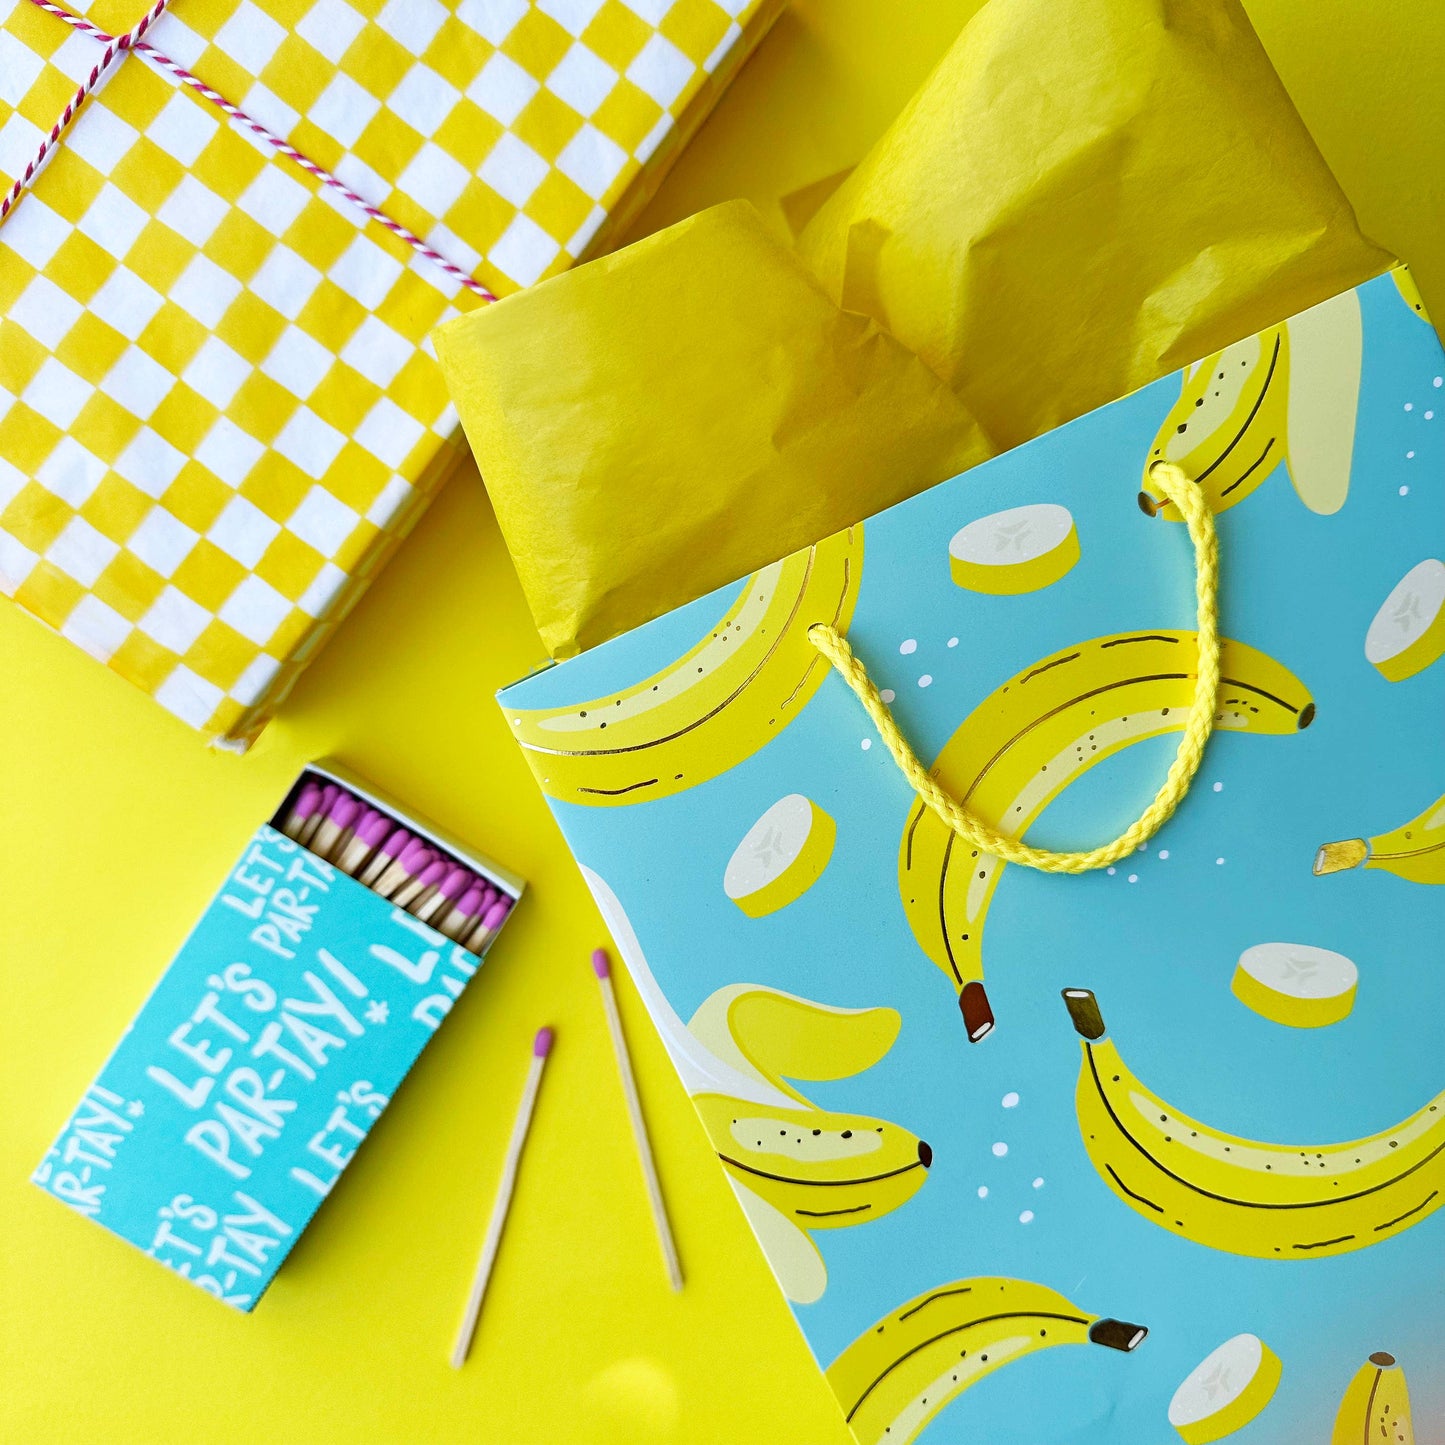 Flat lay of a seafoam green gift bag with whole and sliced yellow bananas  